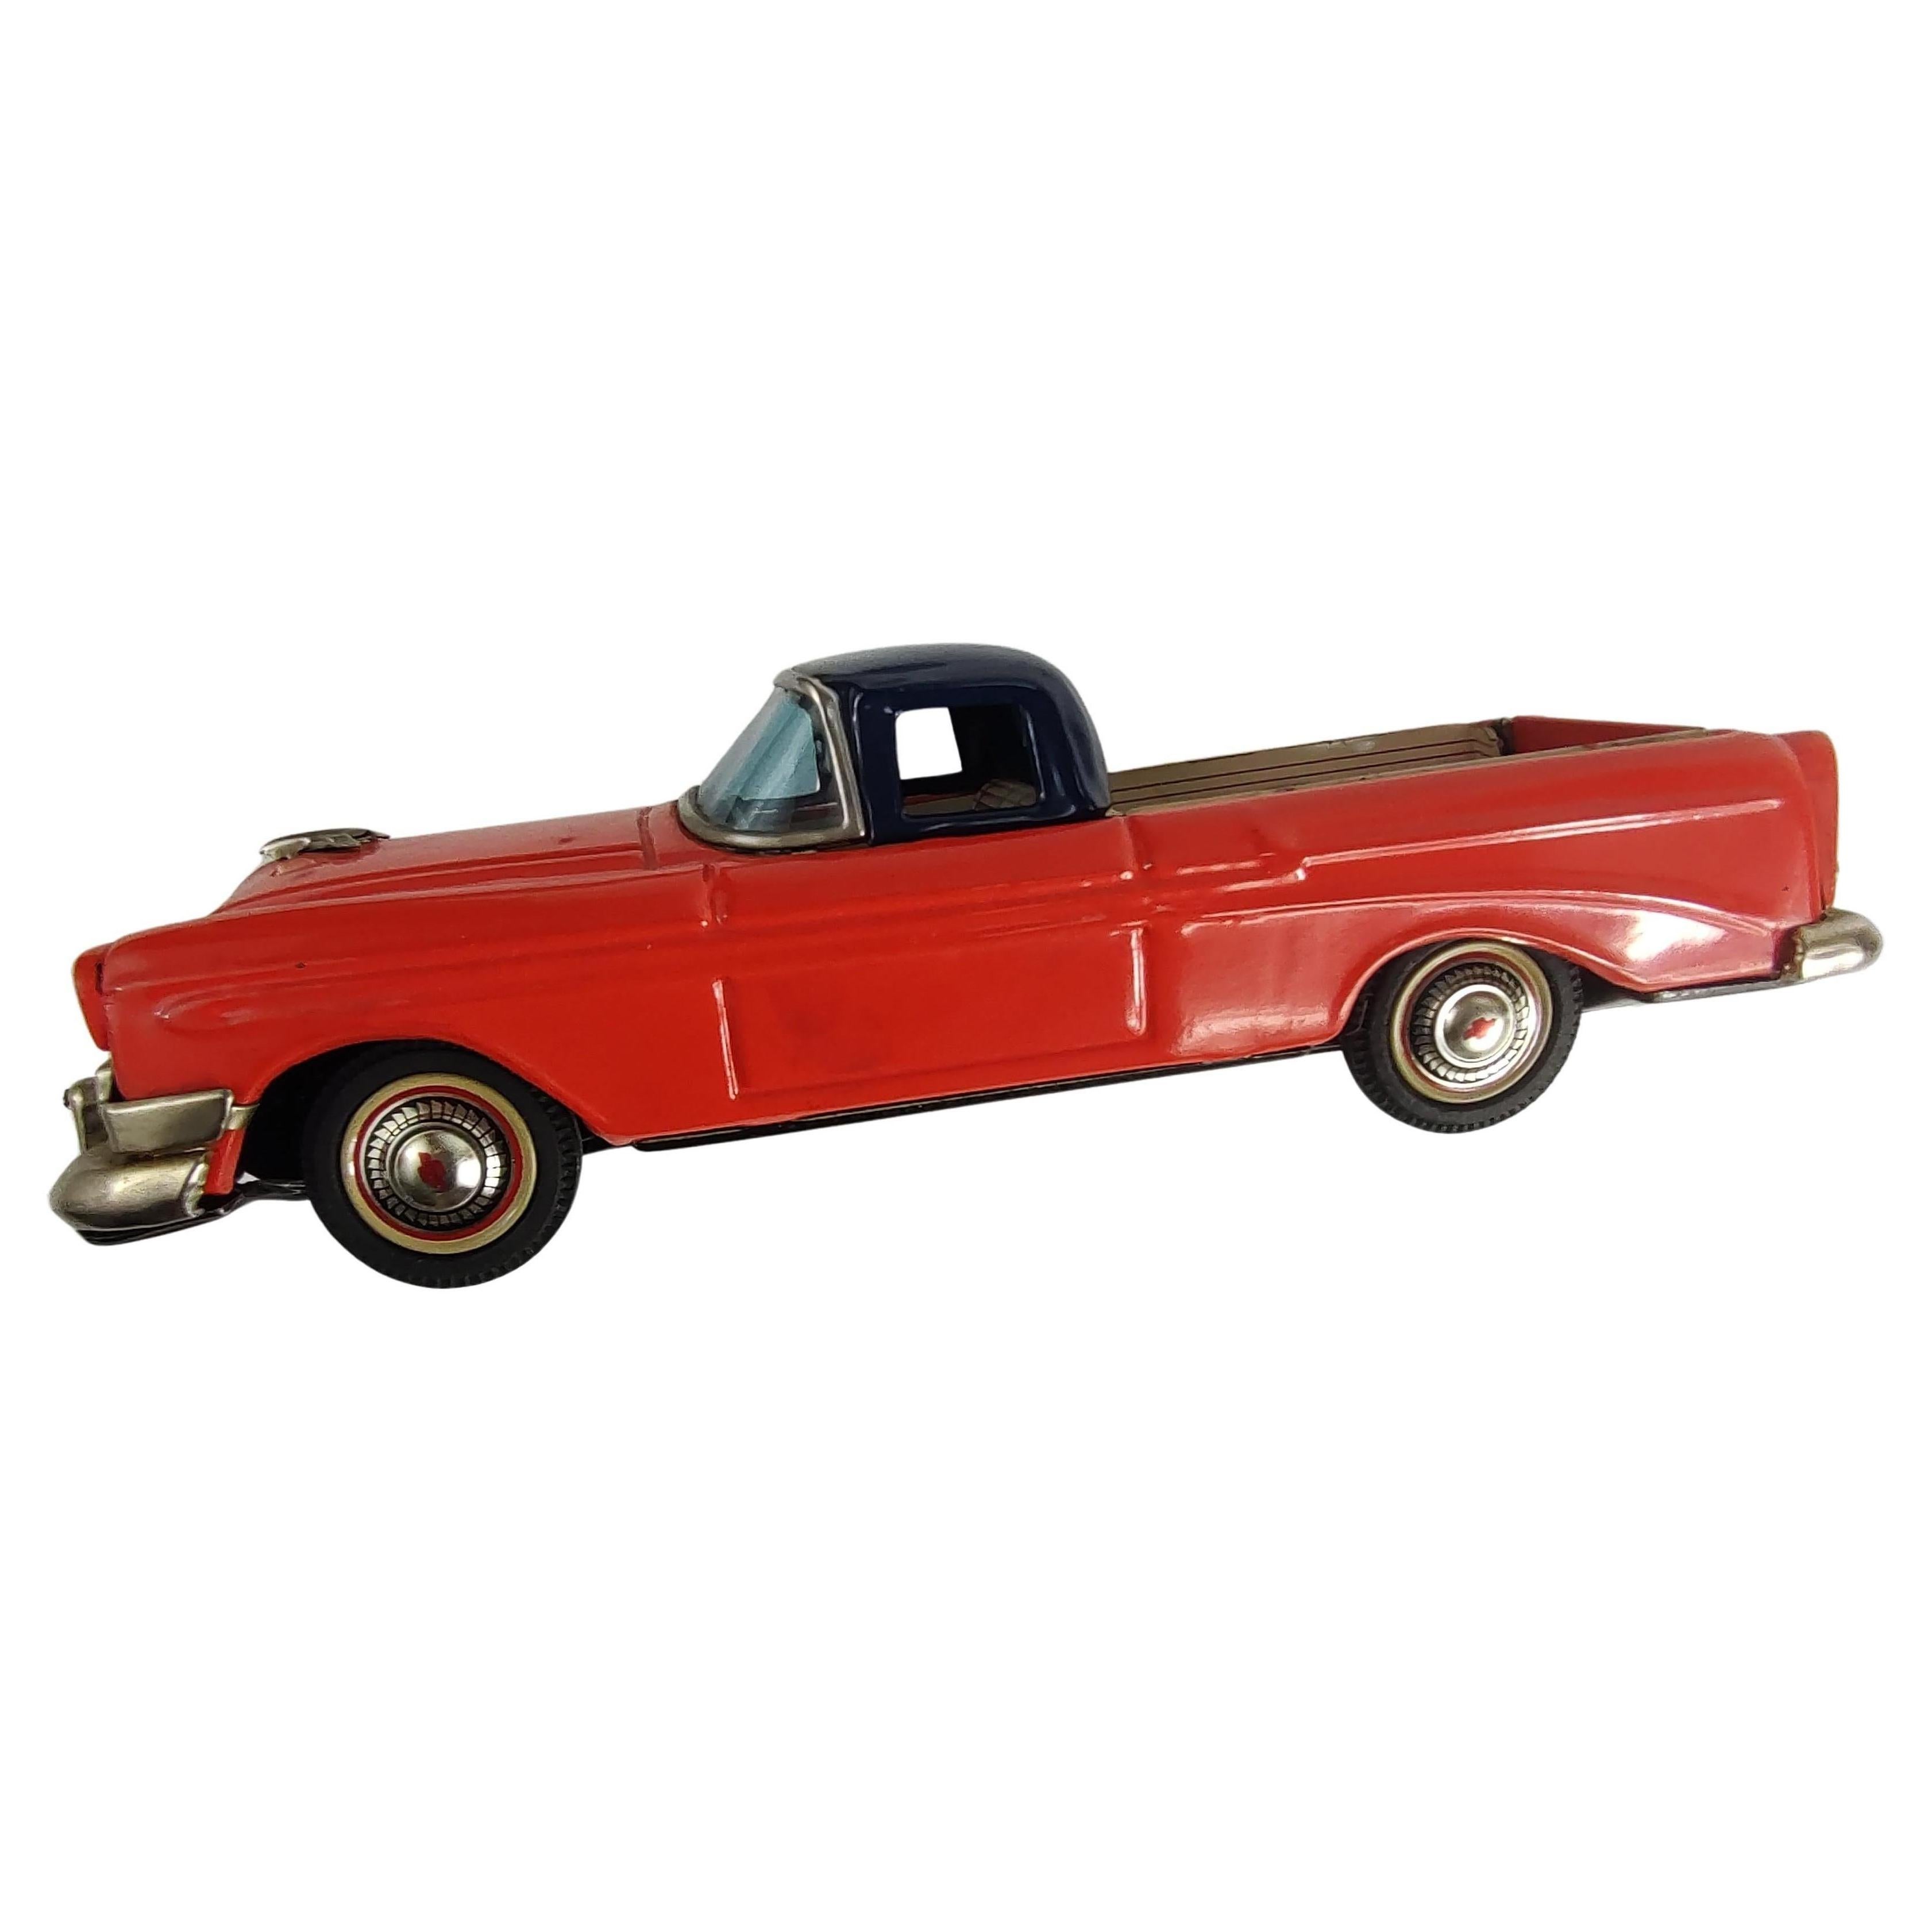 Fantastic friction motor and tin liho body in excellent vintage condition. C 1956 Chevrolet El Camino in red & black with a drop down tailgate. Japanese from the mid fifties. Believe this to be an hard to find model in this condition. Came from a